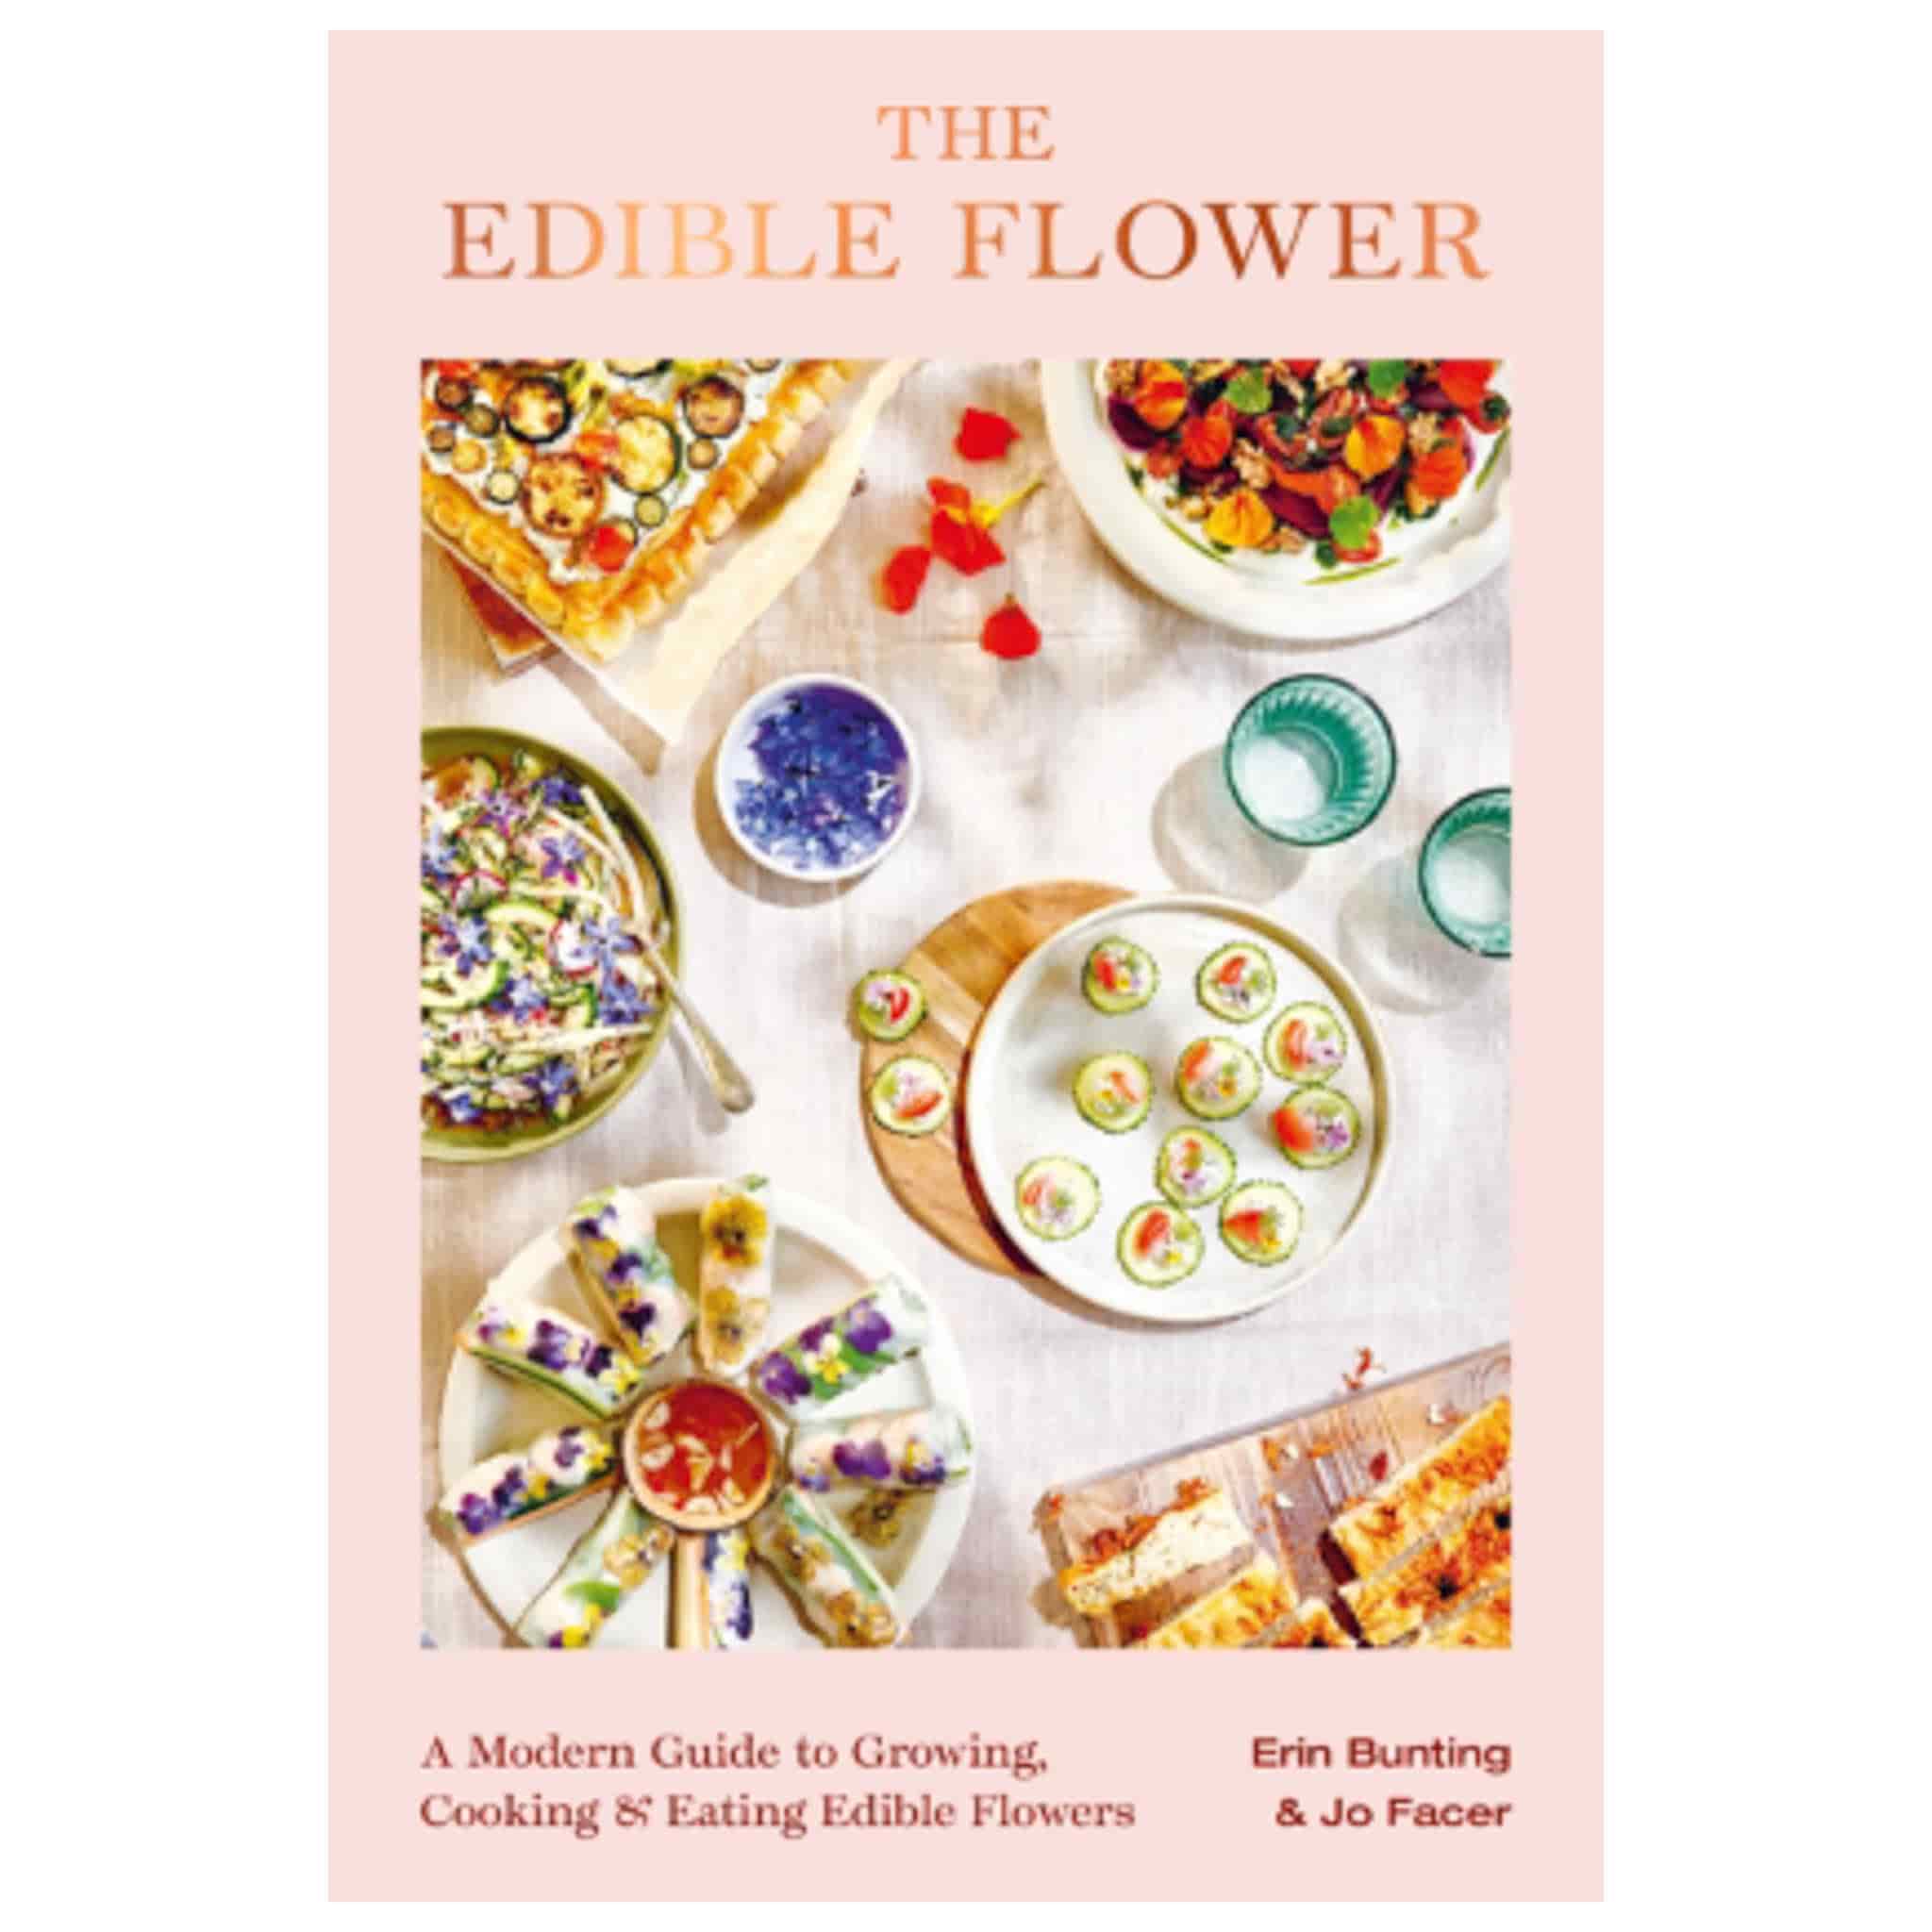 The Edible Flower, by Erin Bunting and Jo Facer